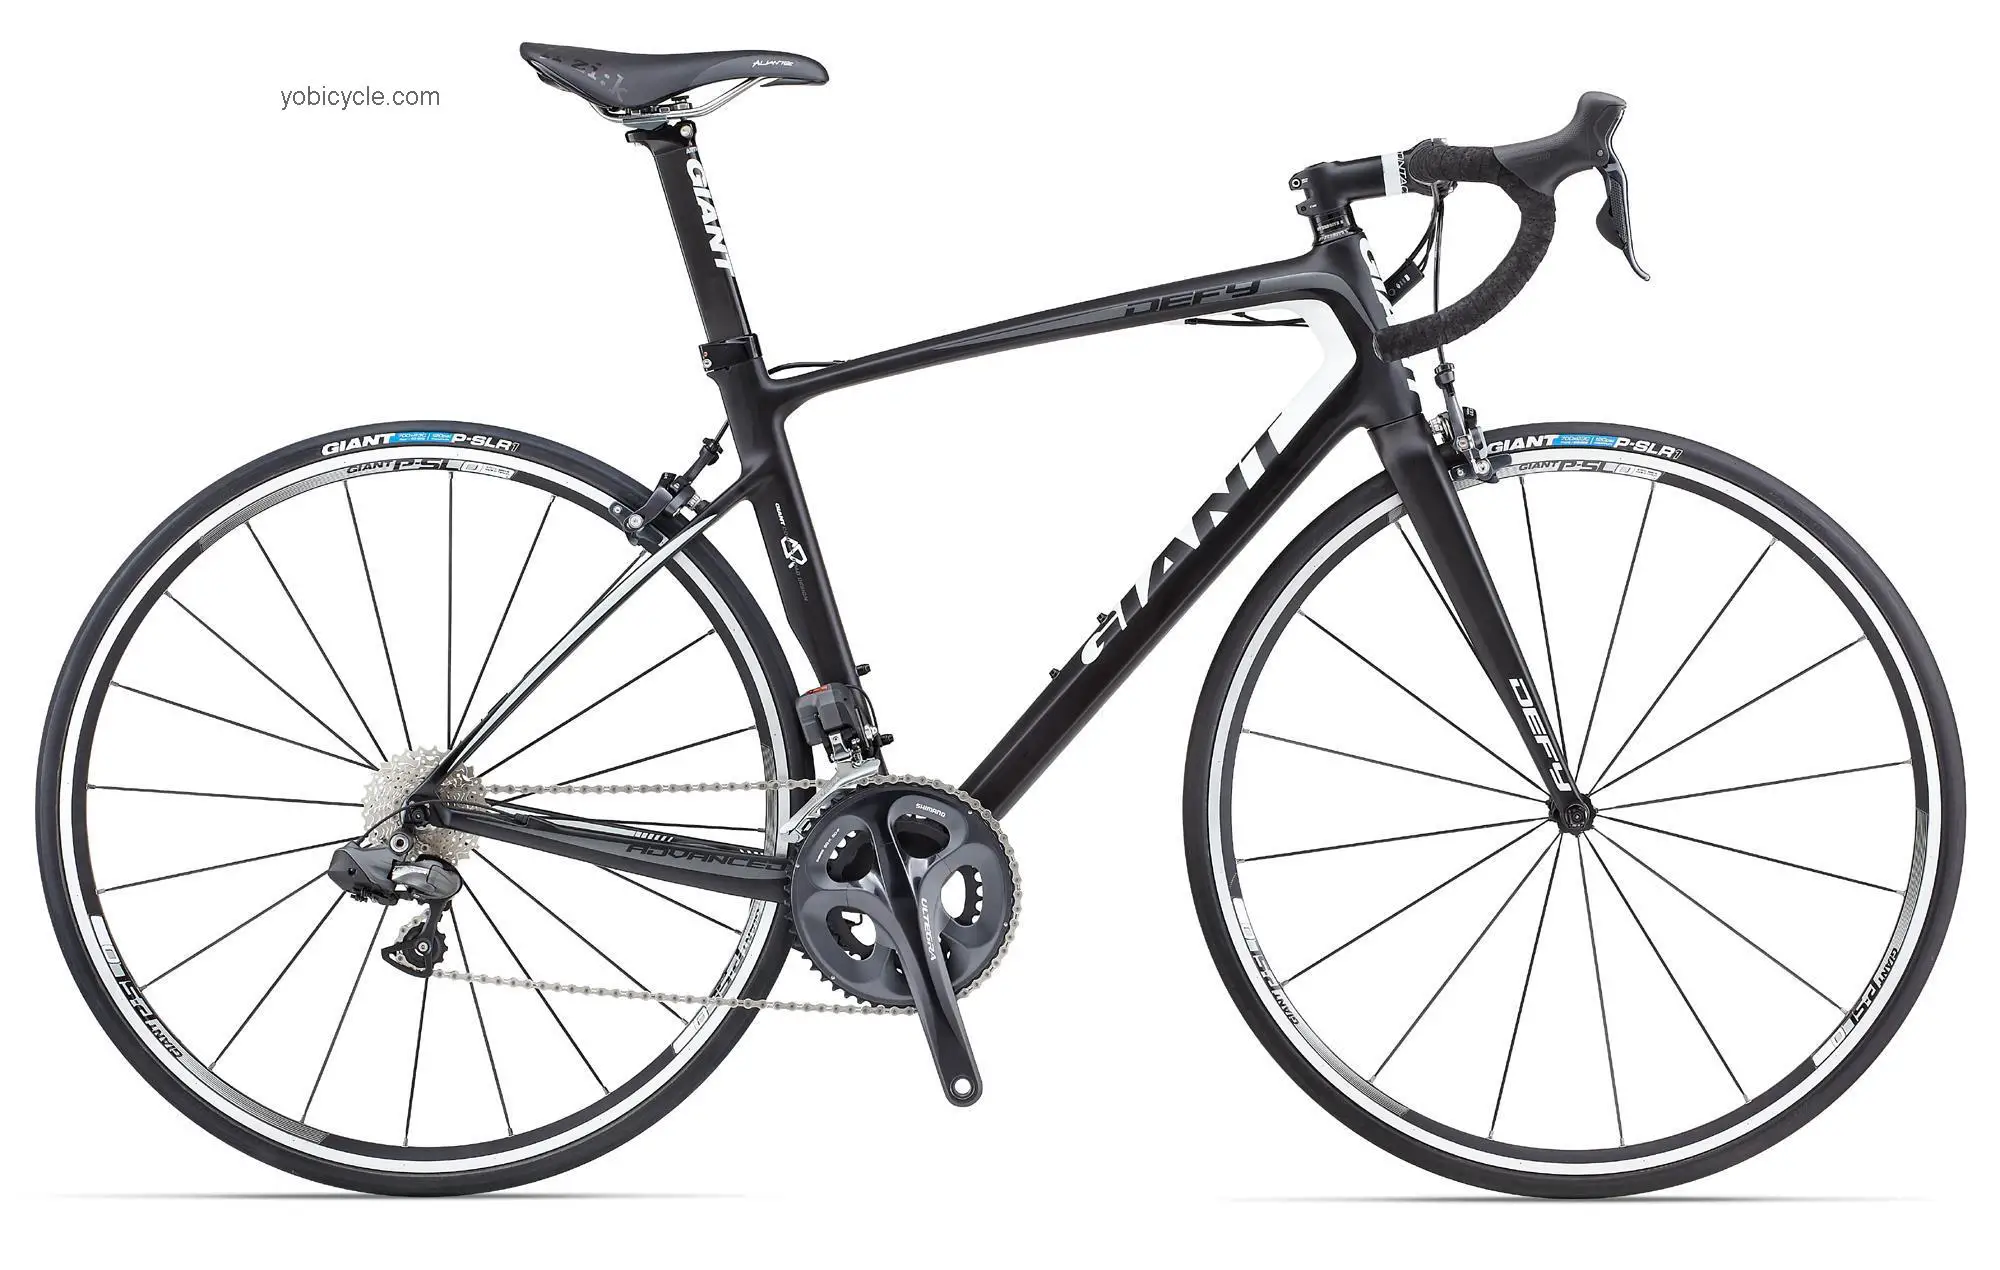 Giant Defy Advanced 0 2013 comparison online with competitors